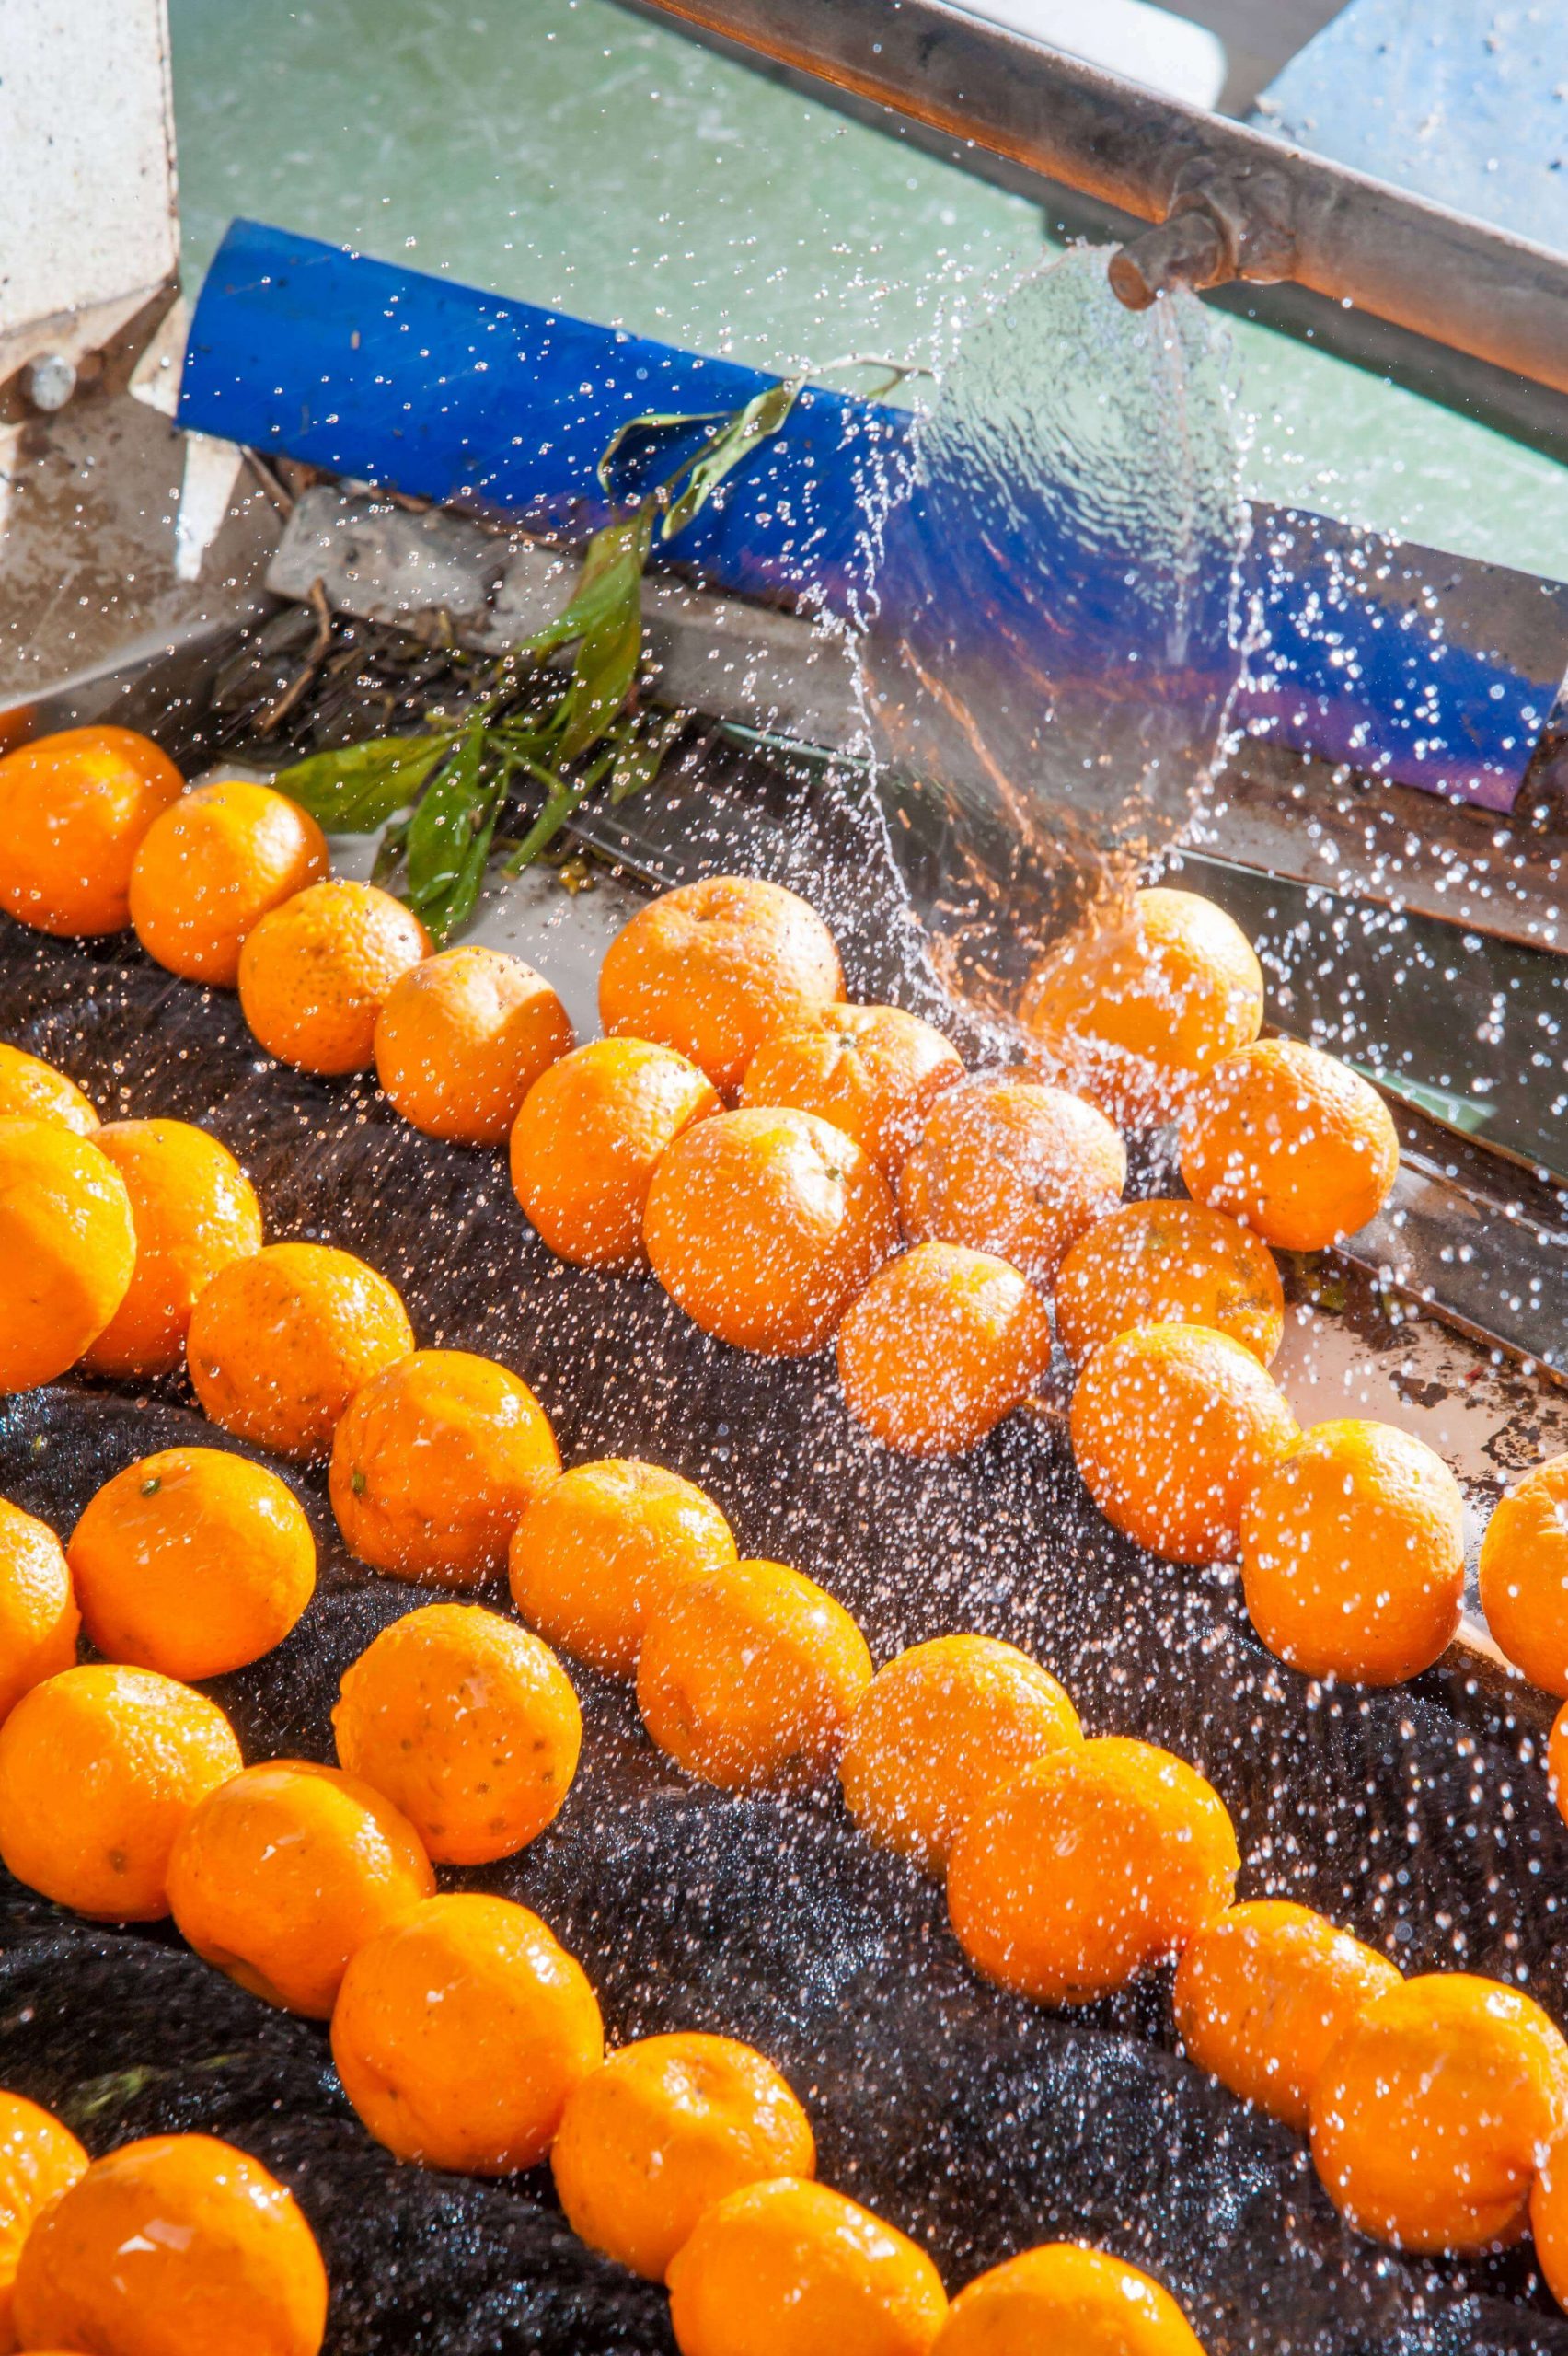 Tangerines being washed by a nozzle on a header spraying down onto a processing conveyor.